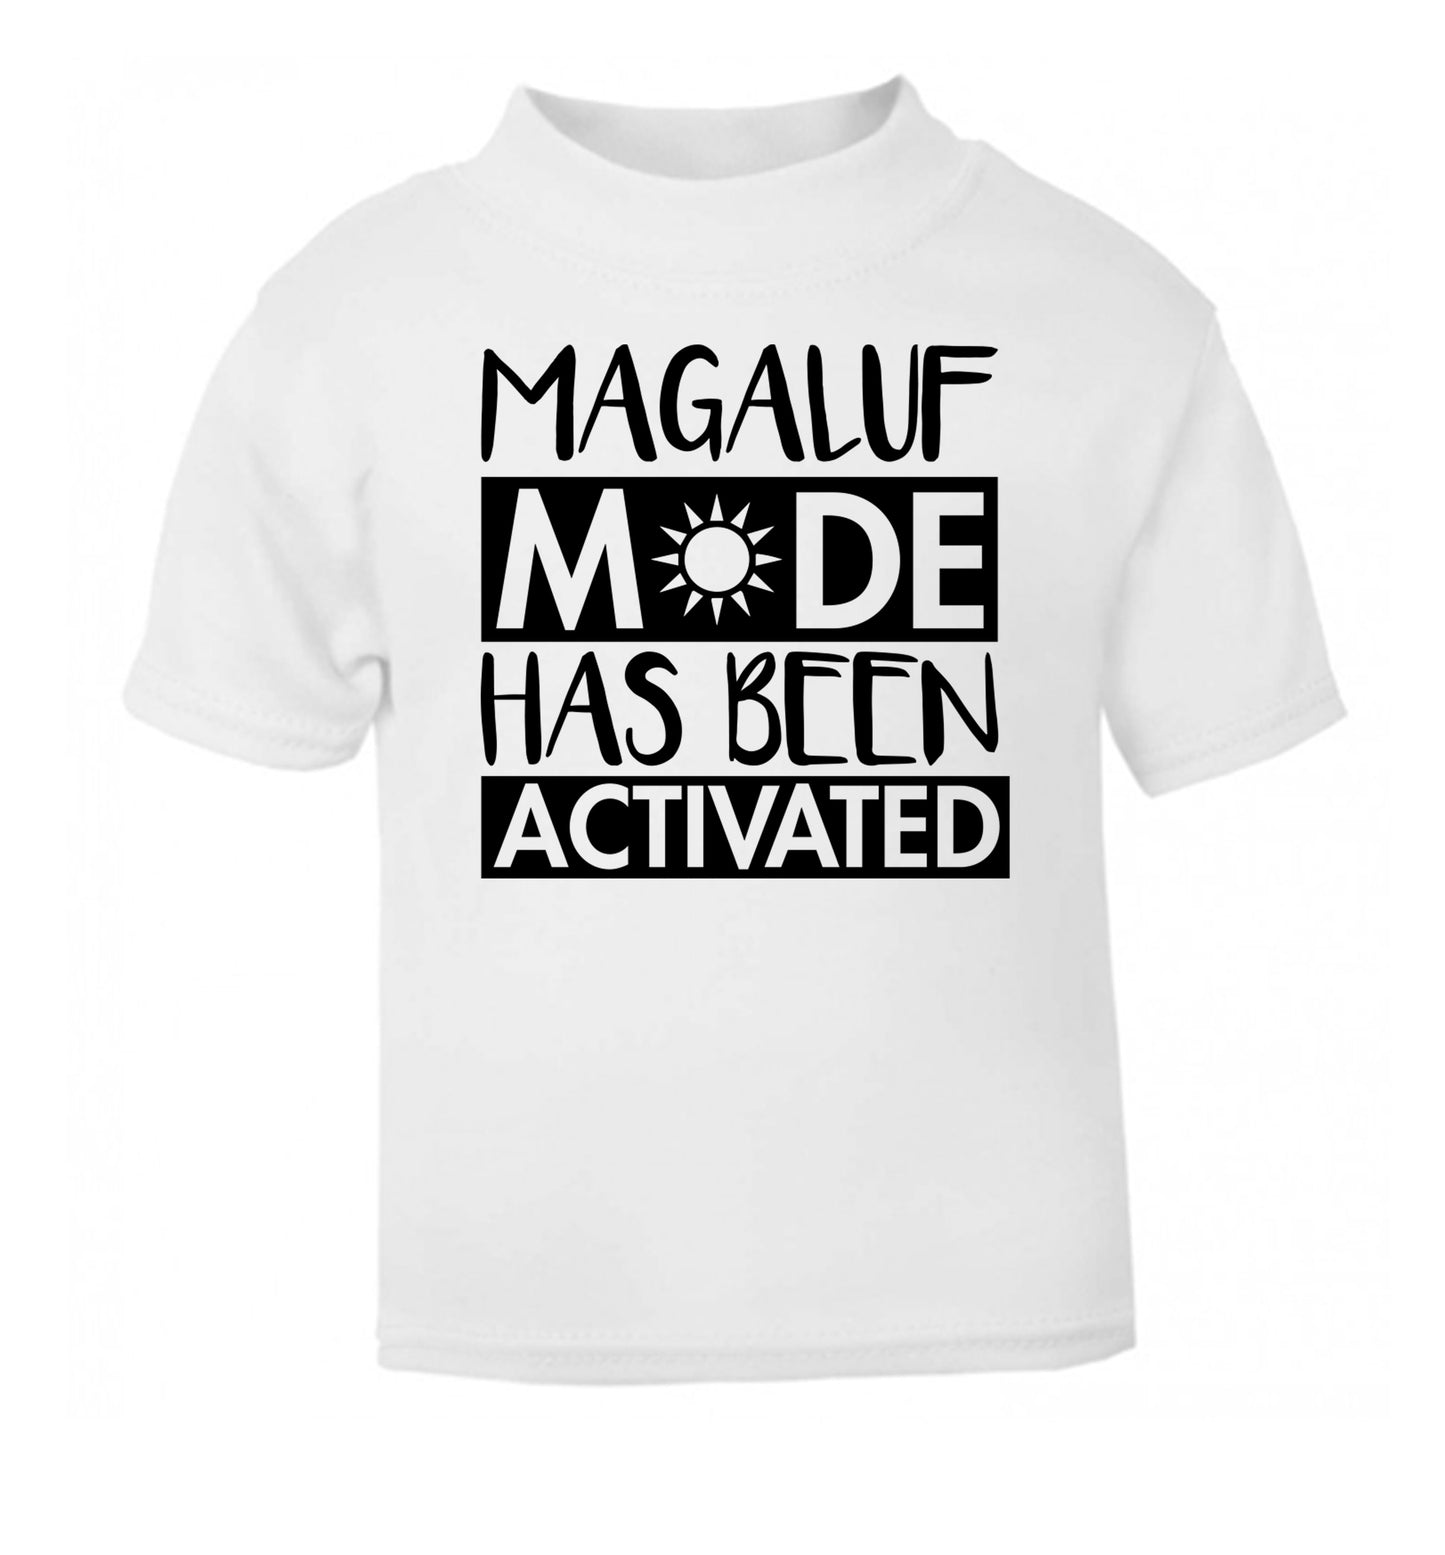 Magaluf mode has been activated white Baby Toddler Tshirt 2 Years